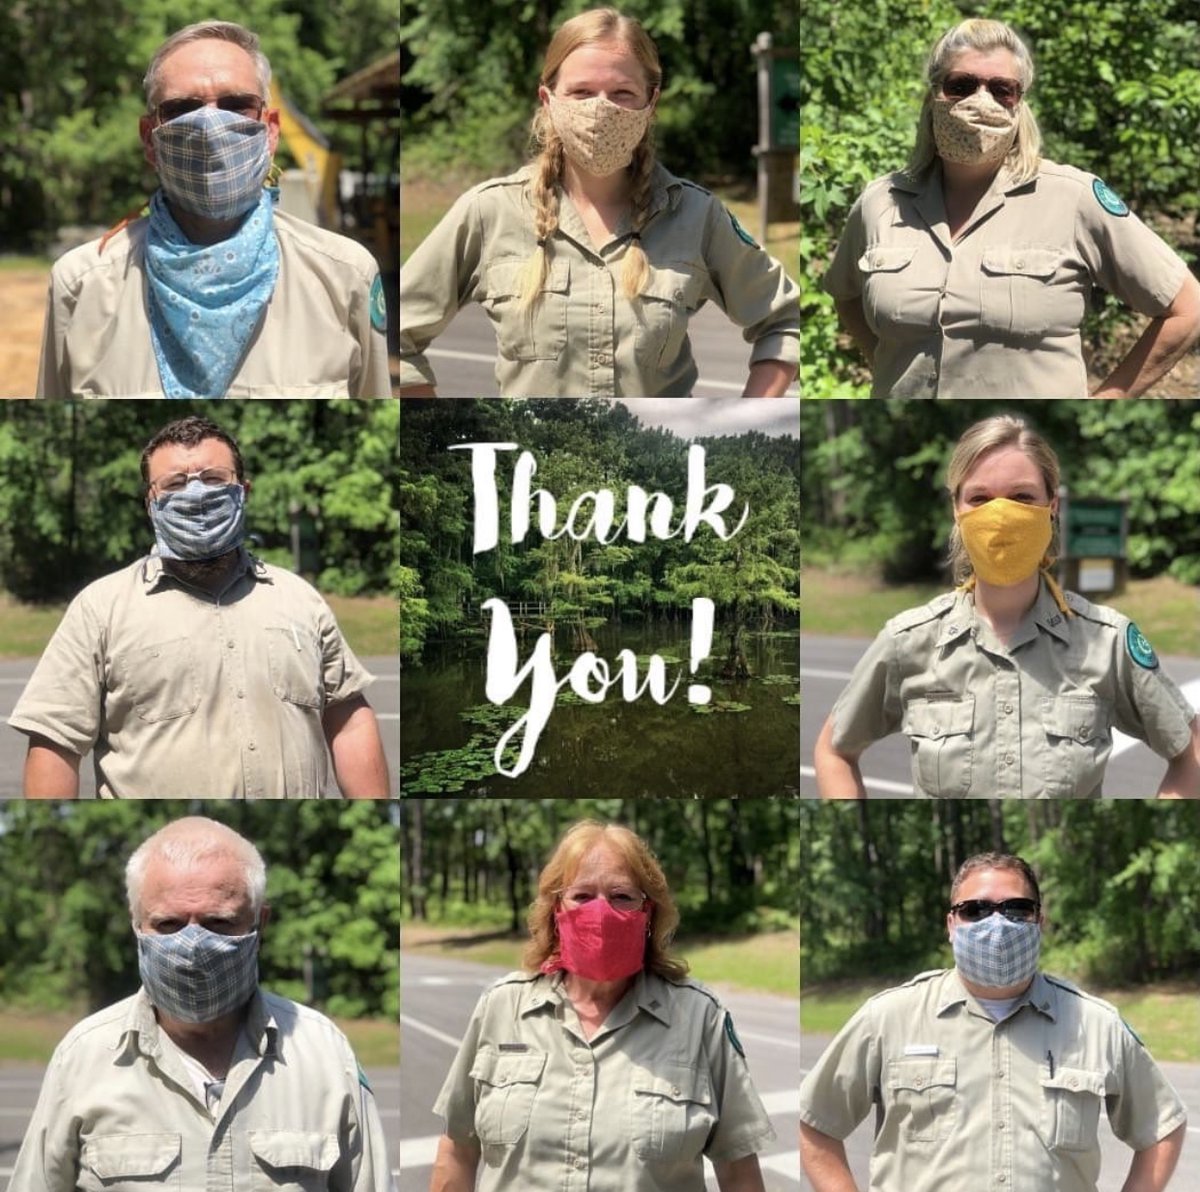 When you visit a State Park you will notice that most park staff will be wearing face coverings- we encourage you to do so, as well. Thank you for recreating responsibly! #HealthyTexas 
 
bit.ly/TxParkSafety

#CaddoLake #TXStateParks